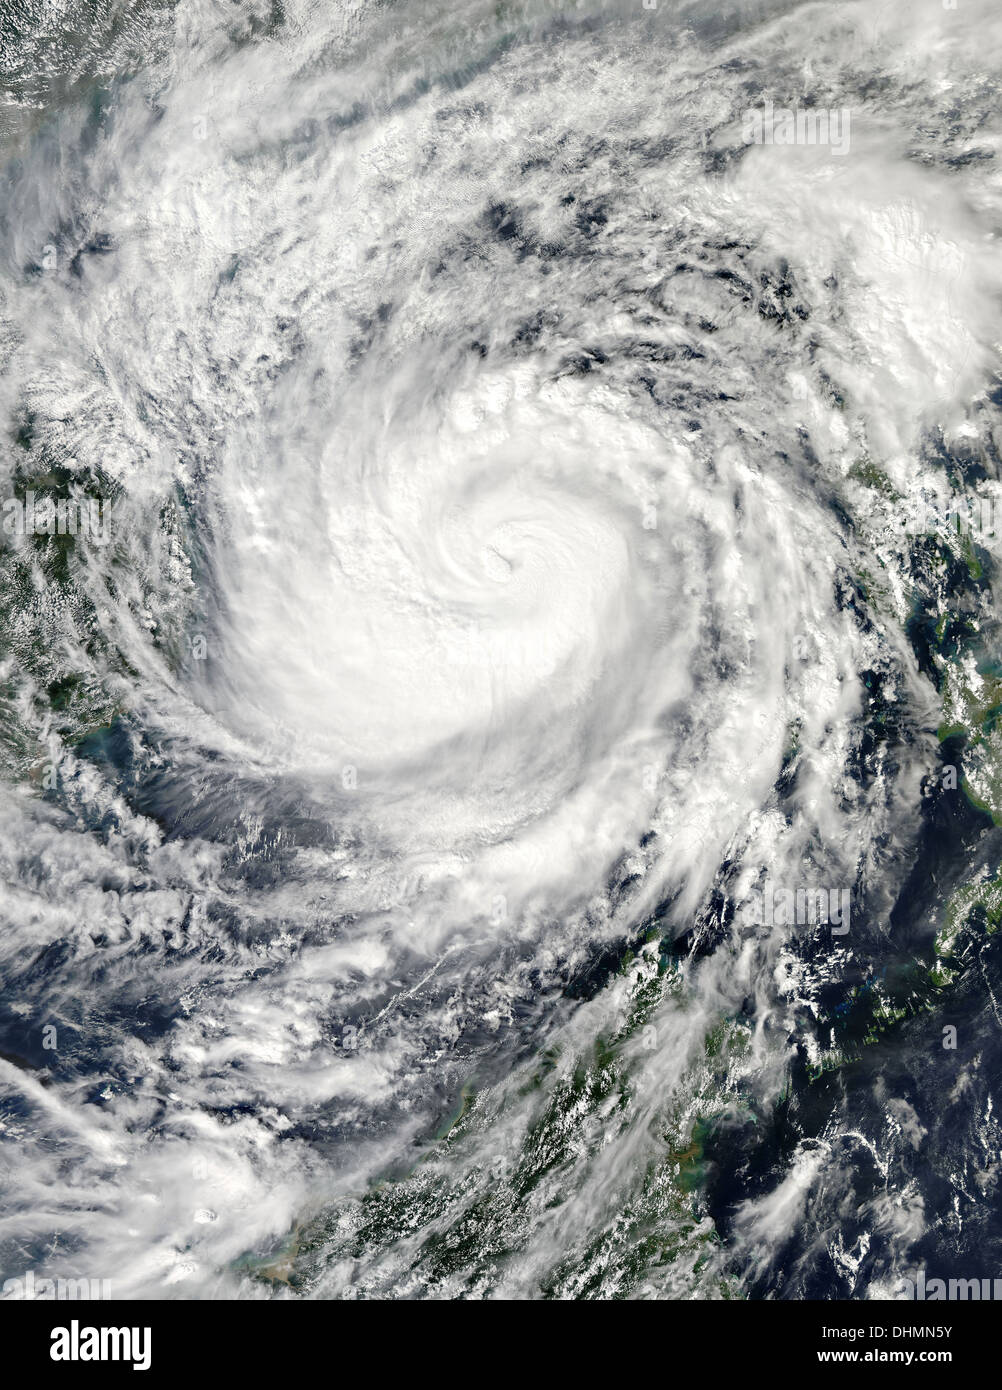 Satellite view of super Typhoon Haiyan in the middle of the South China Sea headed toward Vietnam after devastating the Philippine Islands November 9, 2013. Stock Photo